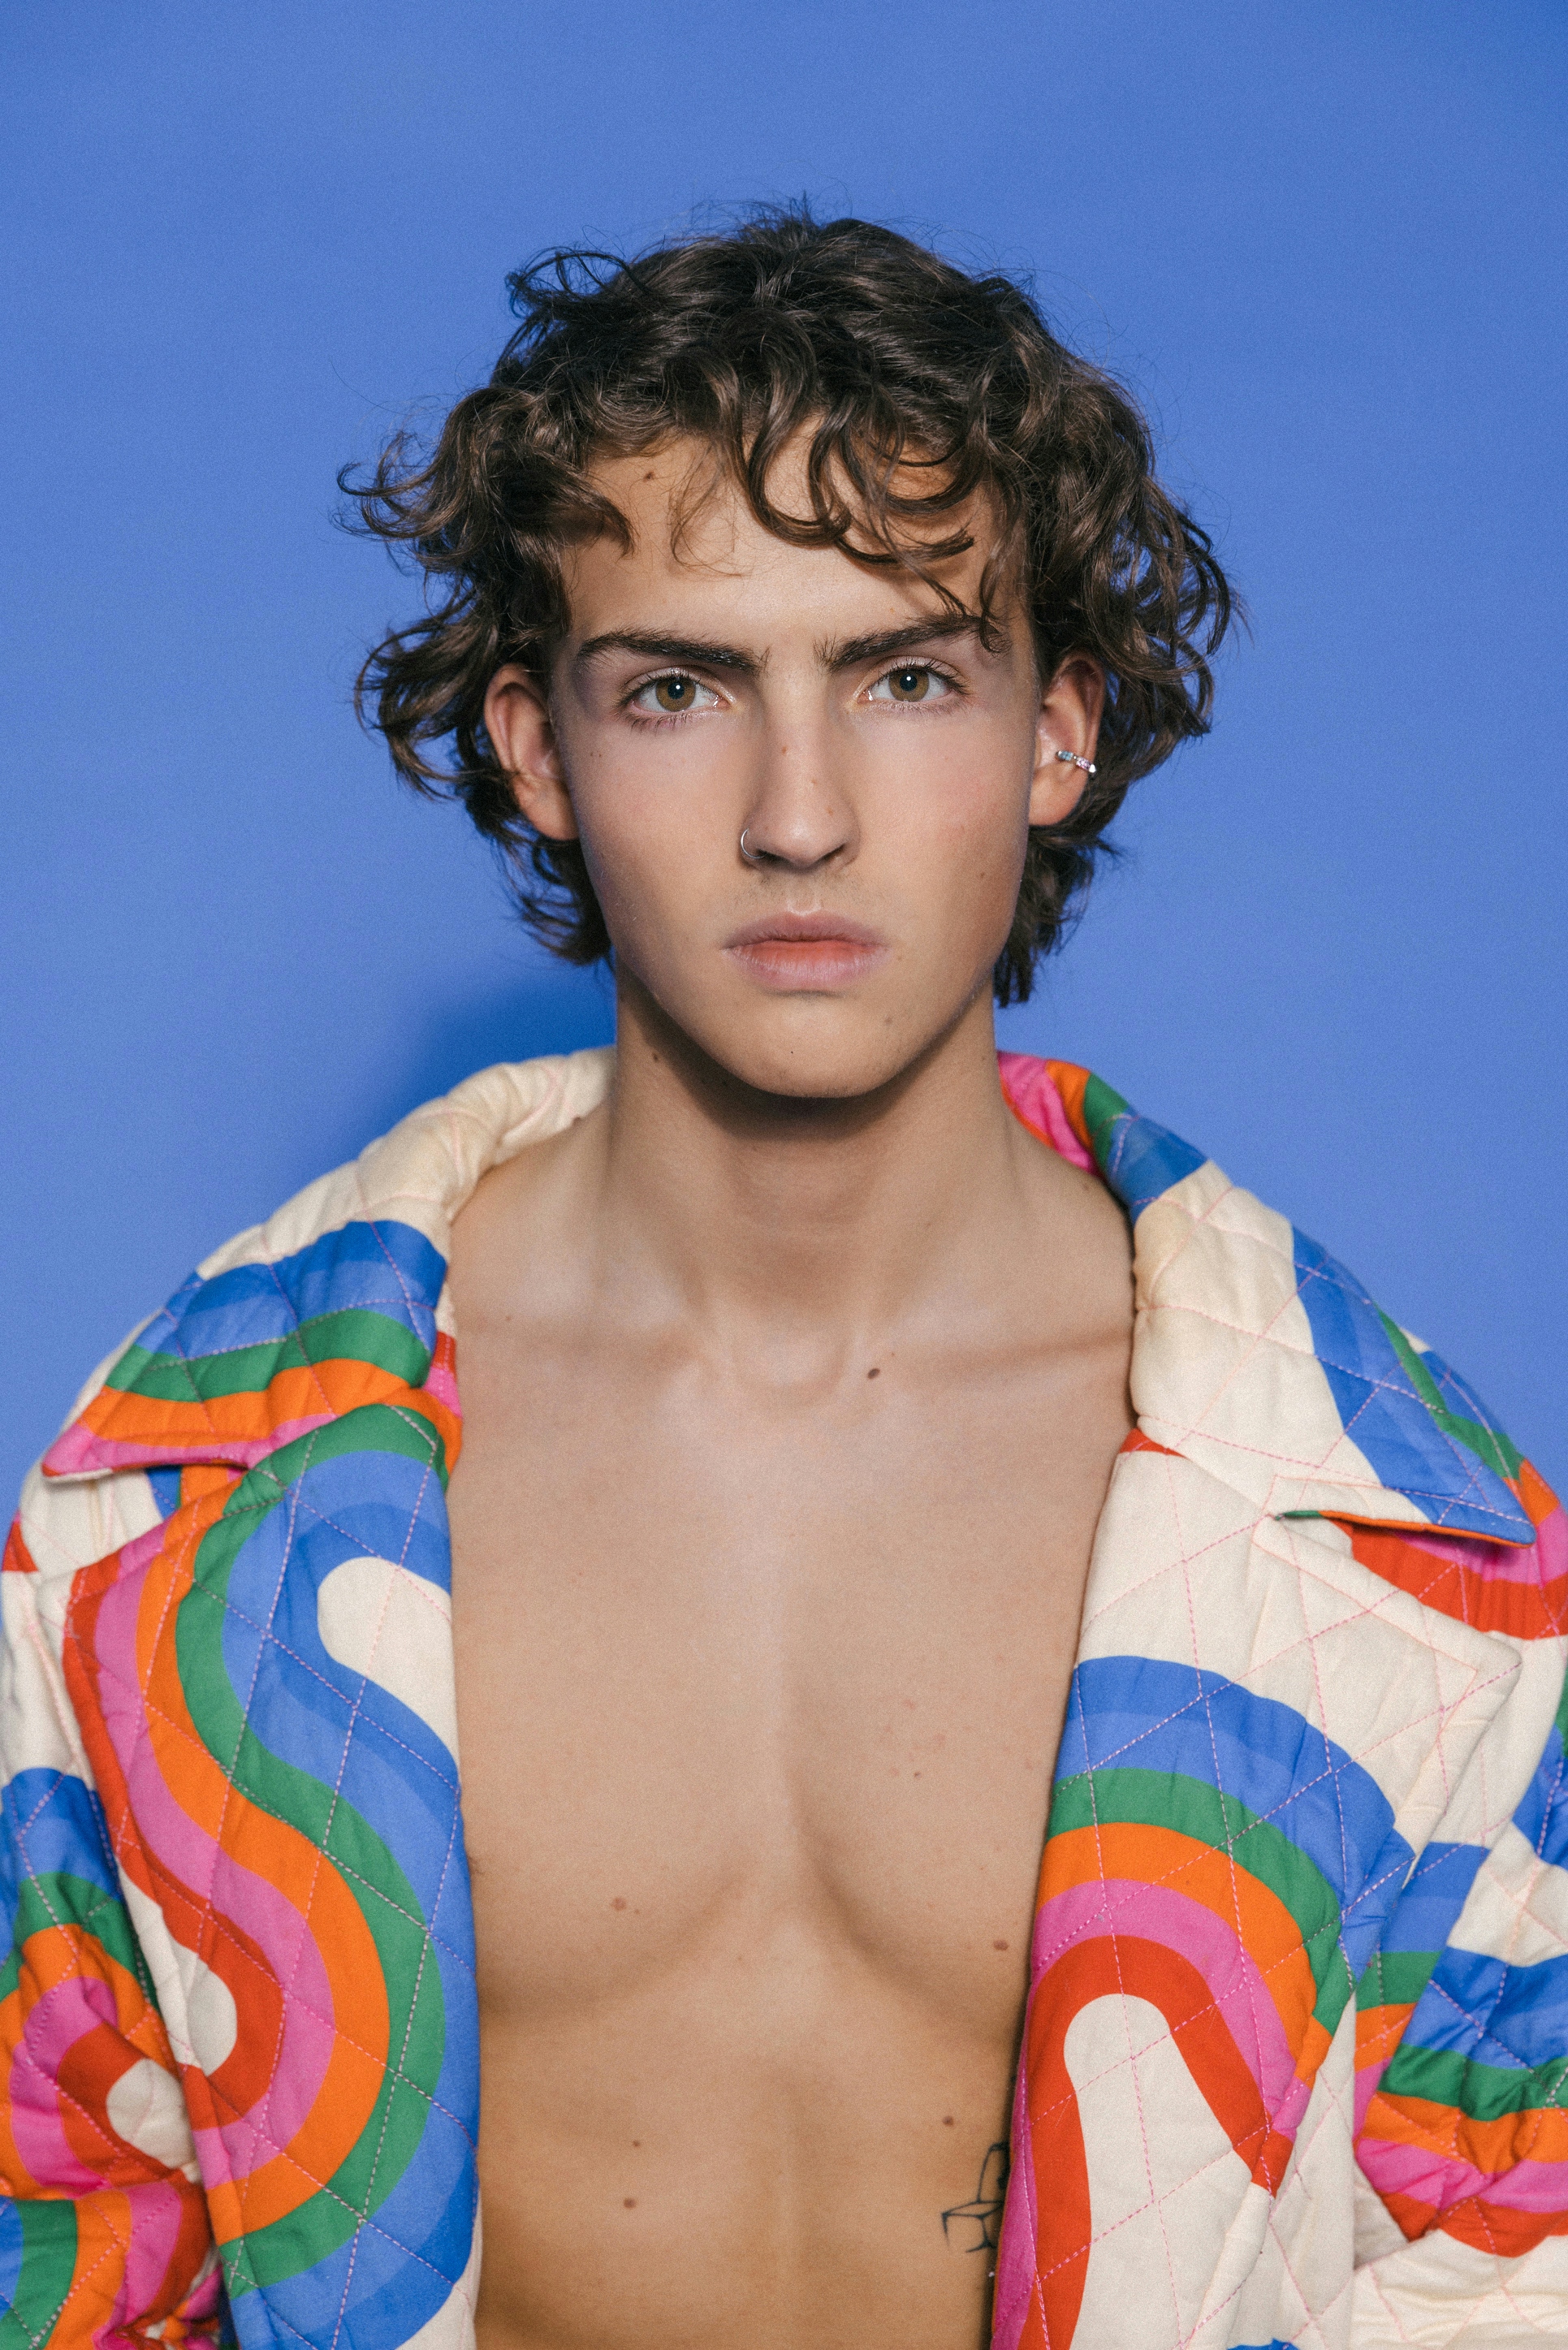 A young man wearing a colorful, patterned shirt and no undershirt